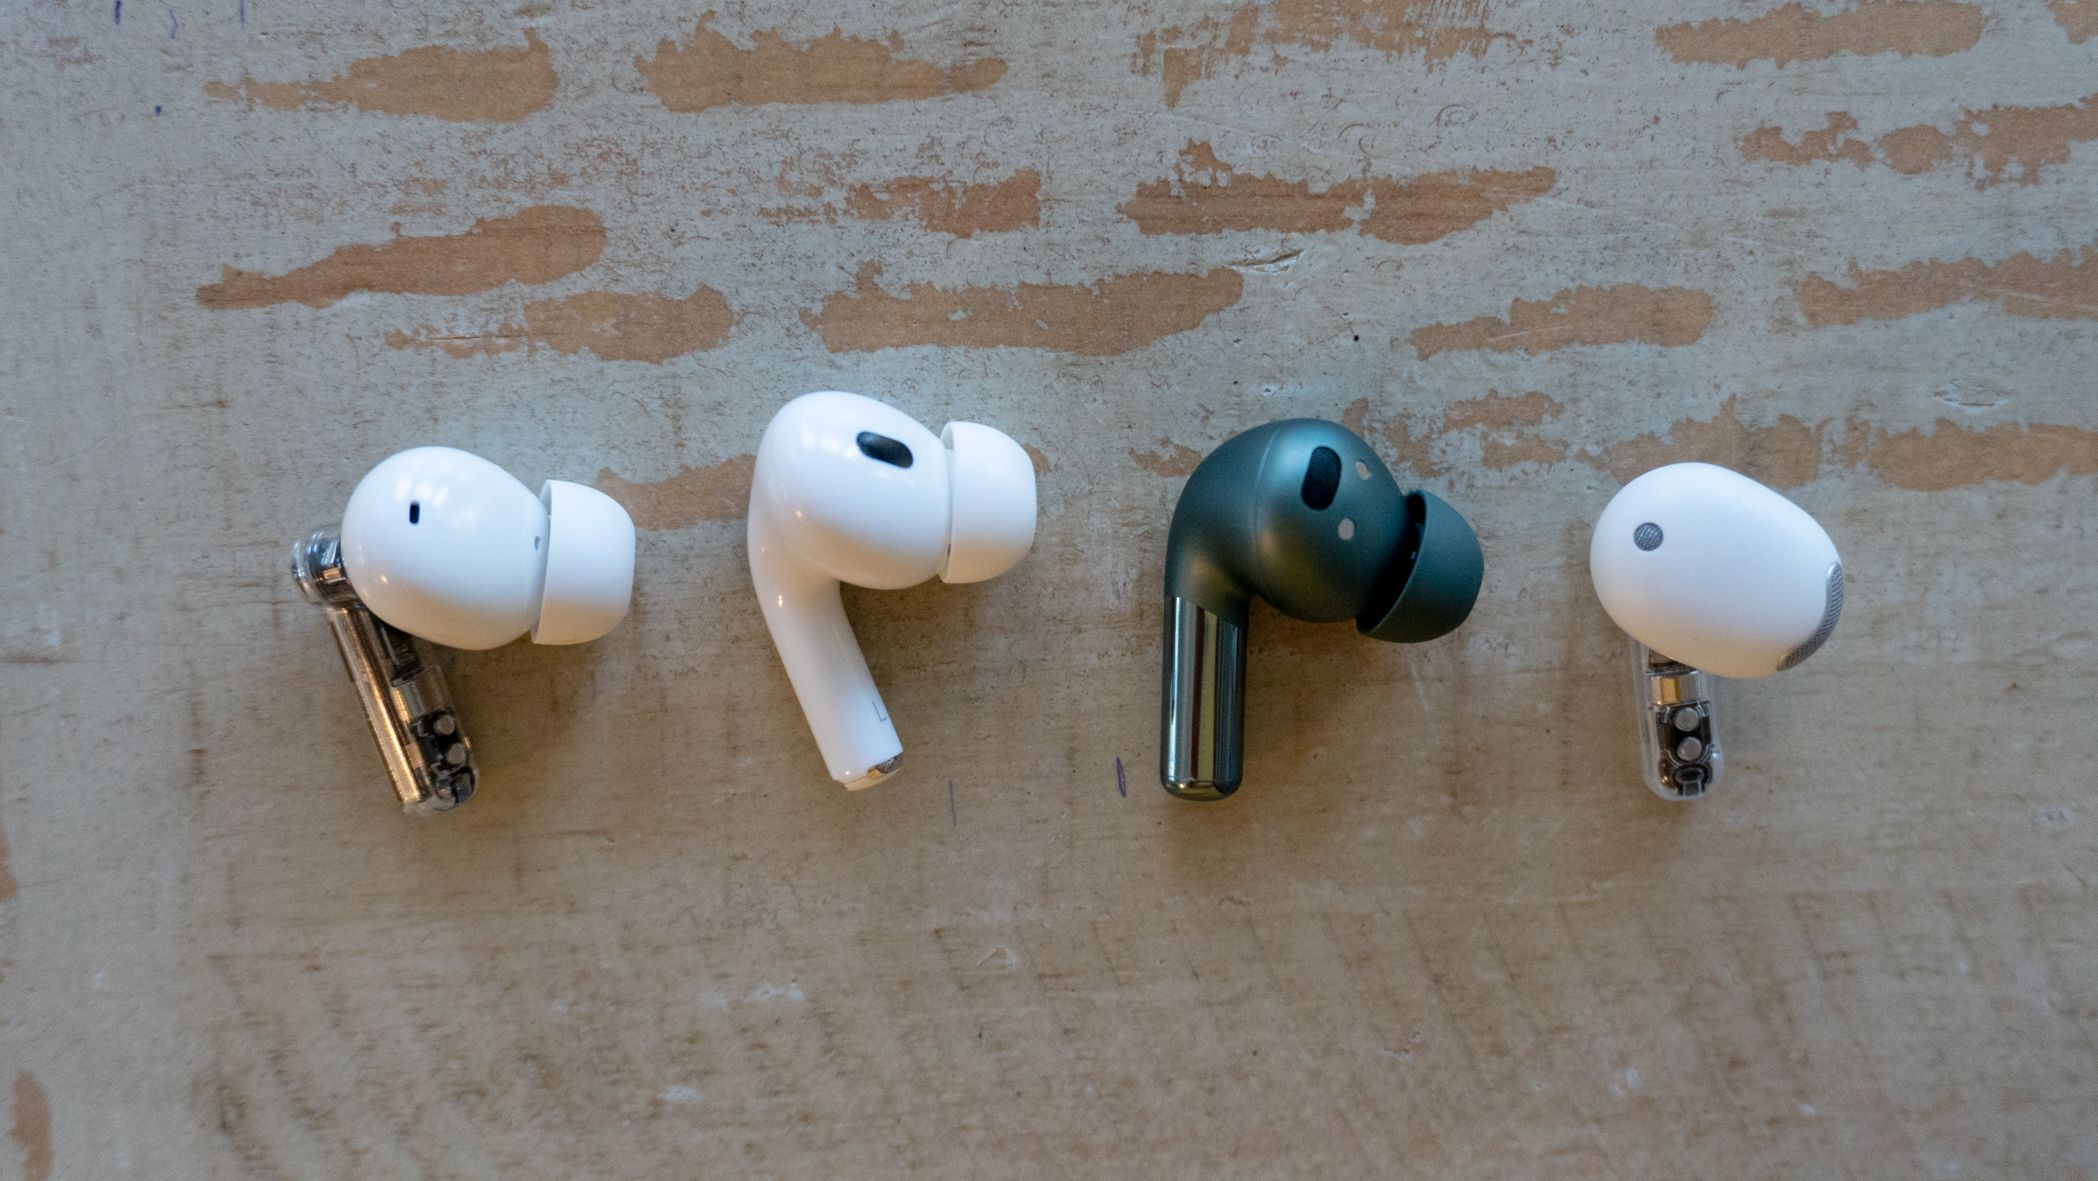 Nothing Ear 2 Buds Have Great Sound and Noise Canceling for $149